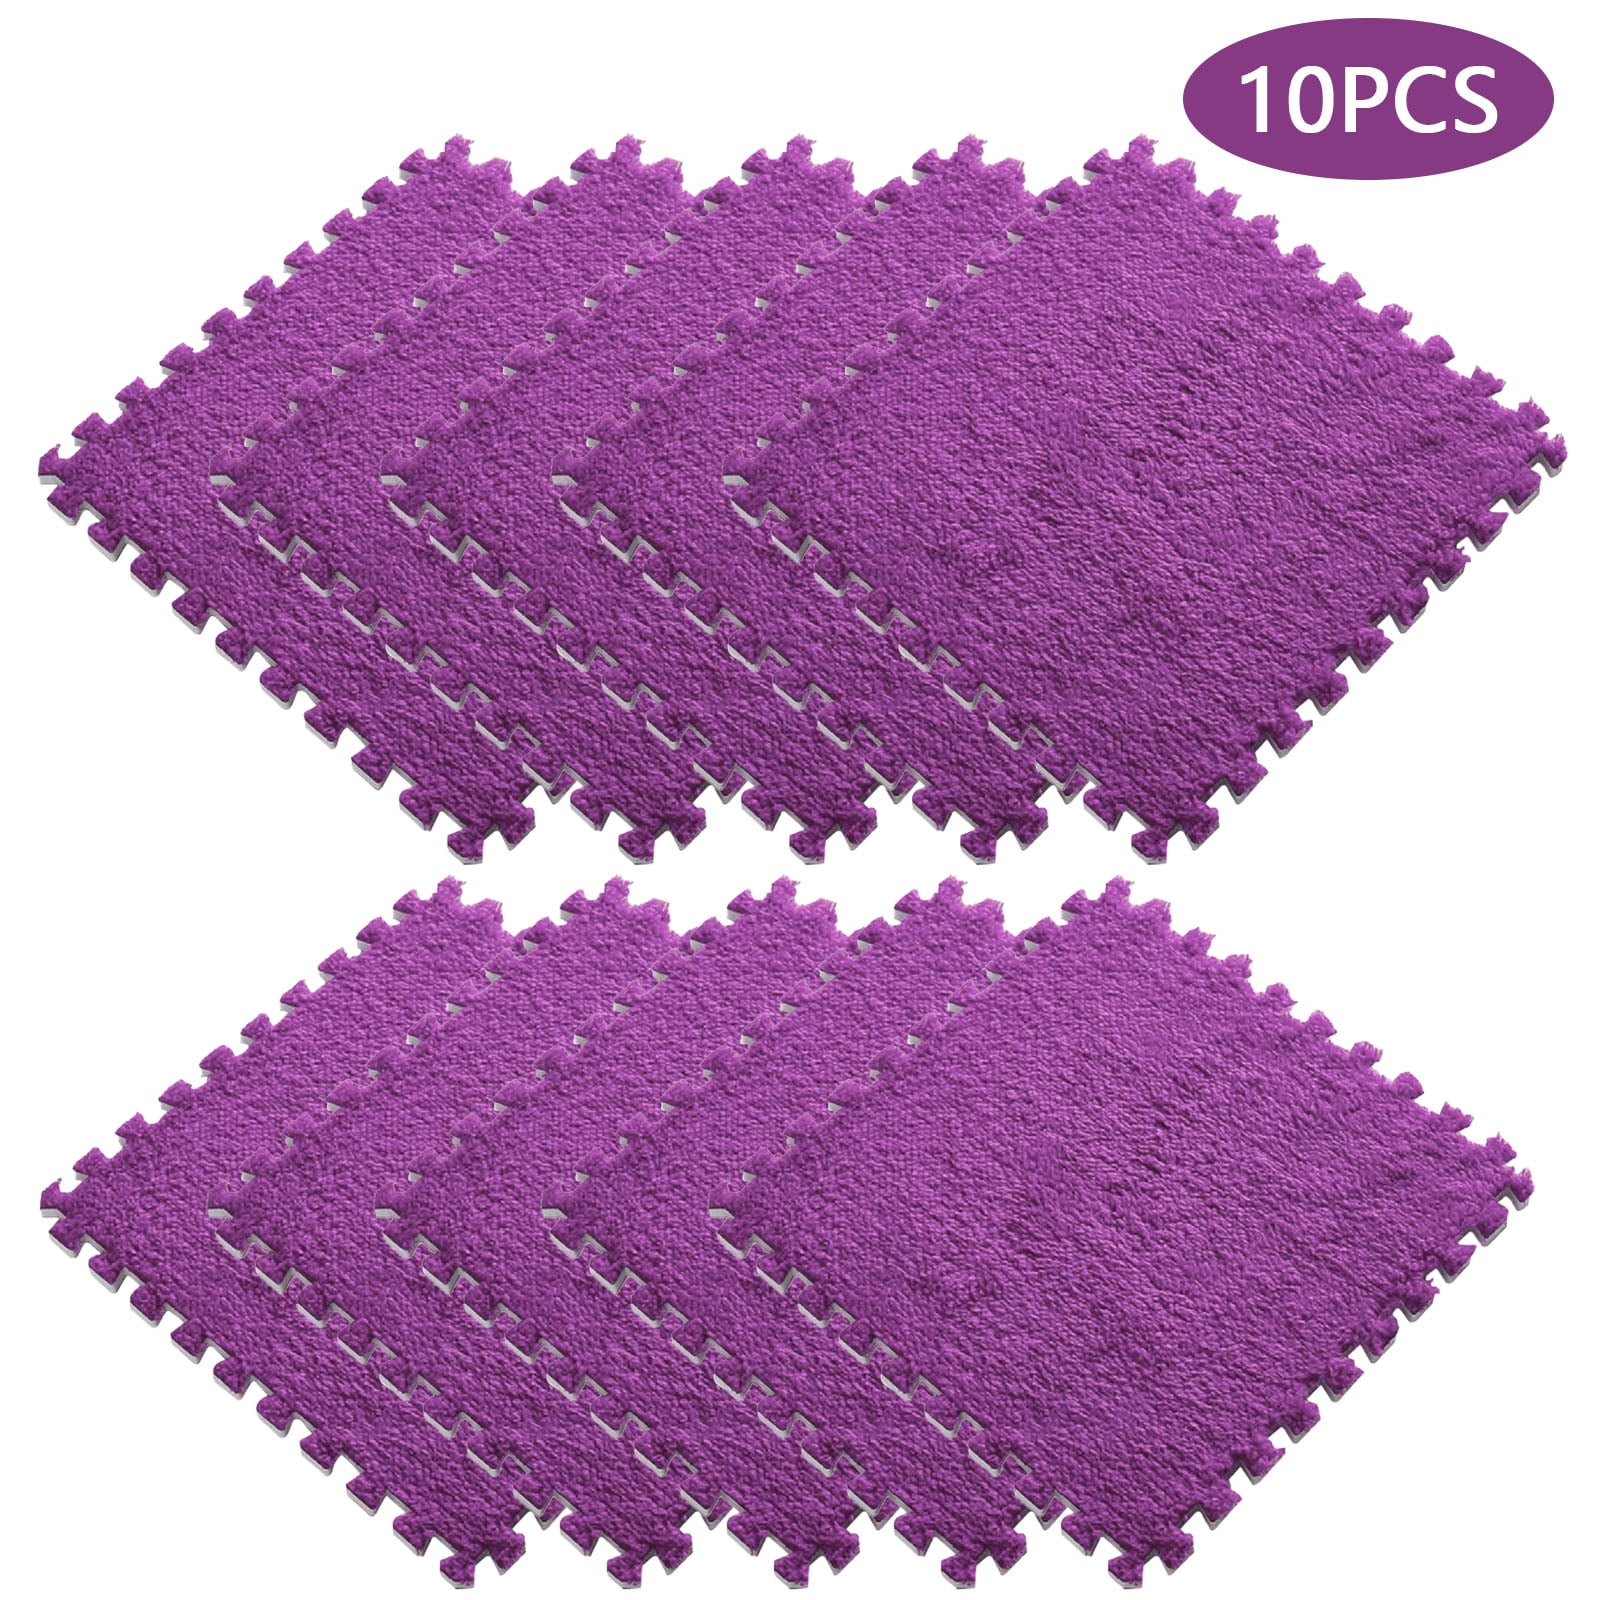 10PCS Plush Puzzle Foam Floor Mat for Kids- Thick Interlocking Fluffy Tiles  with Border Square Rug Split Joint Soft Climbing Carpet Mats Area Rug for  Room Floor 